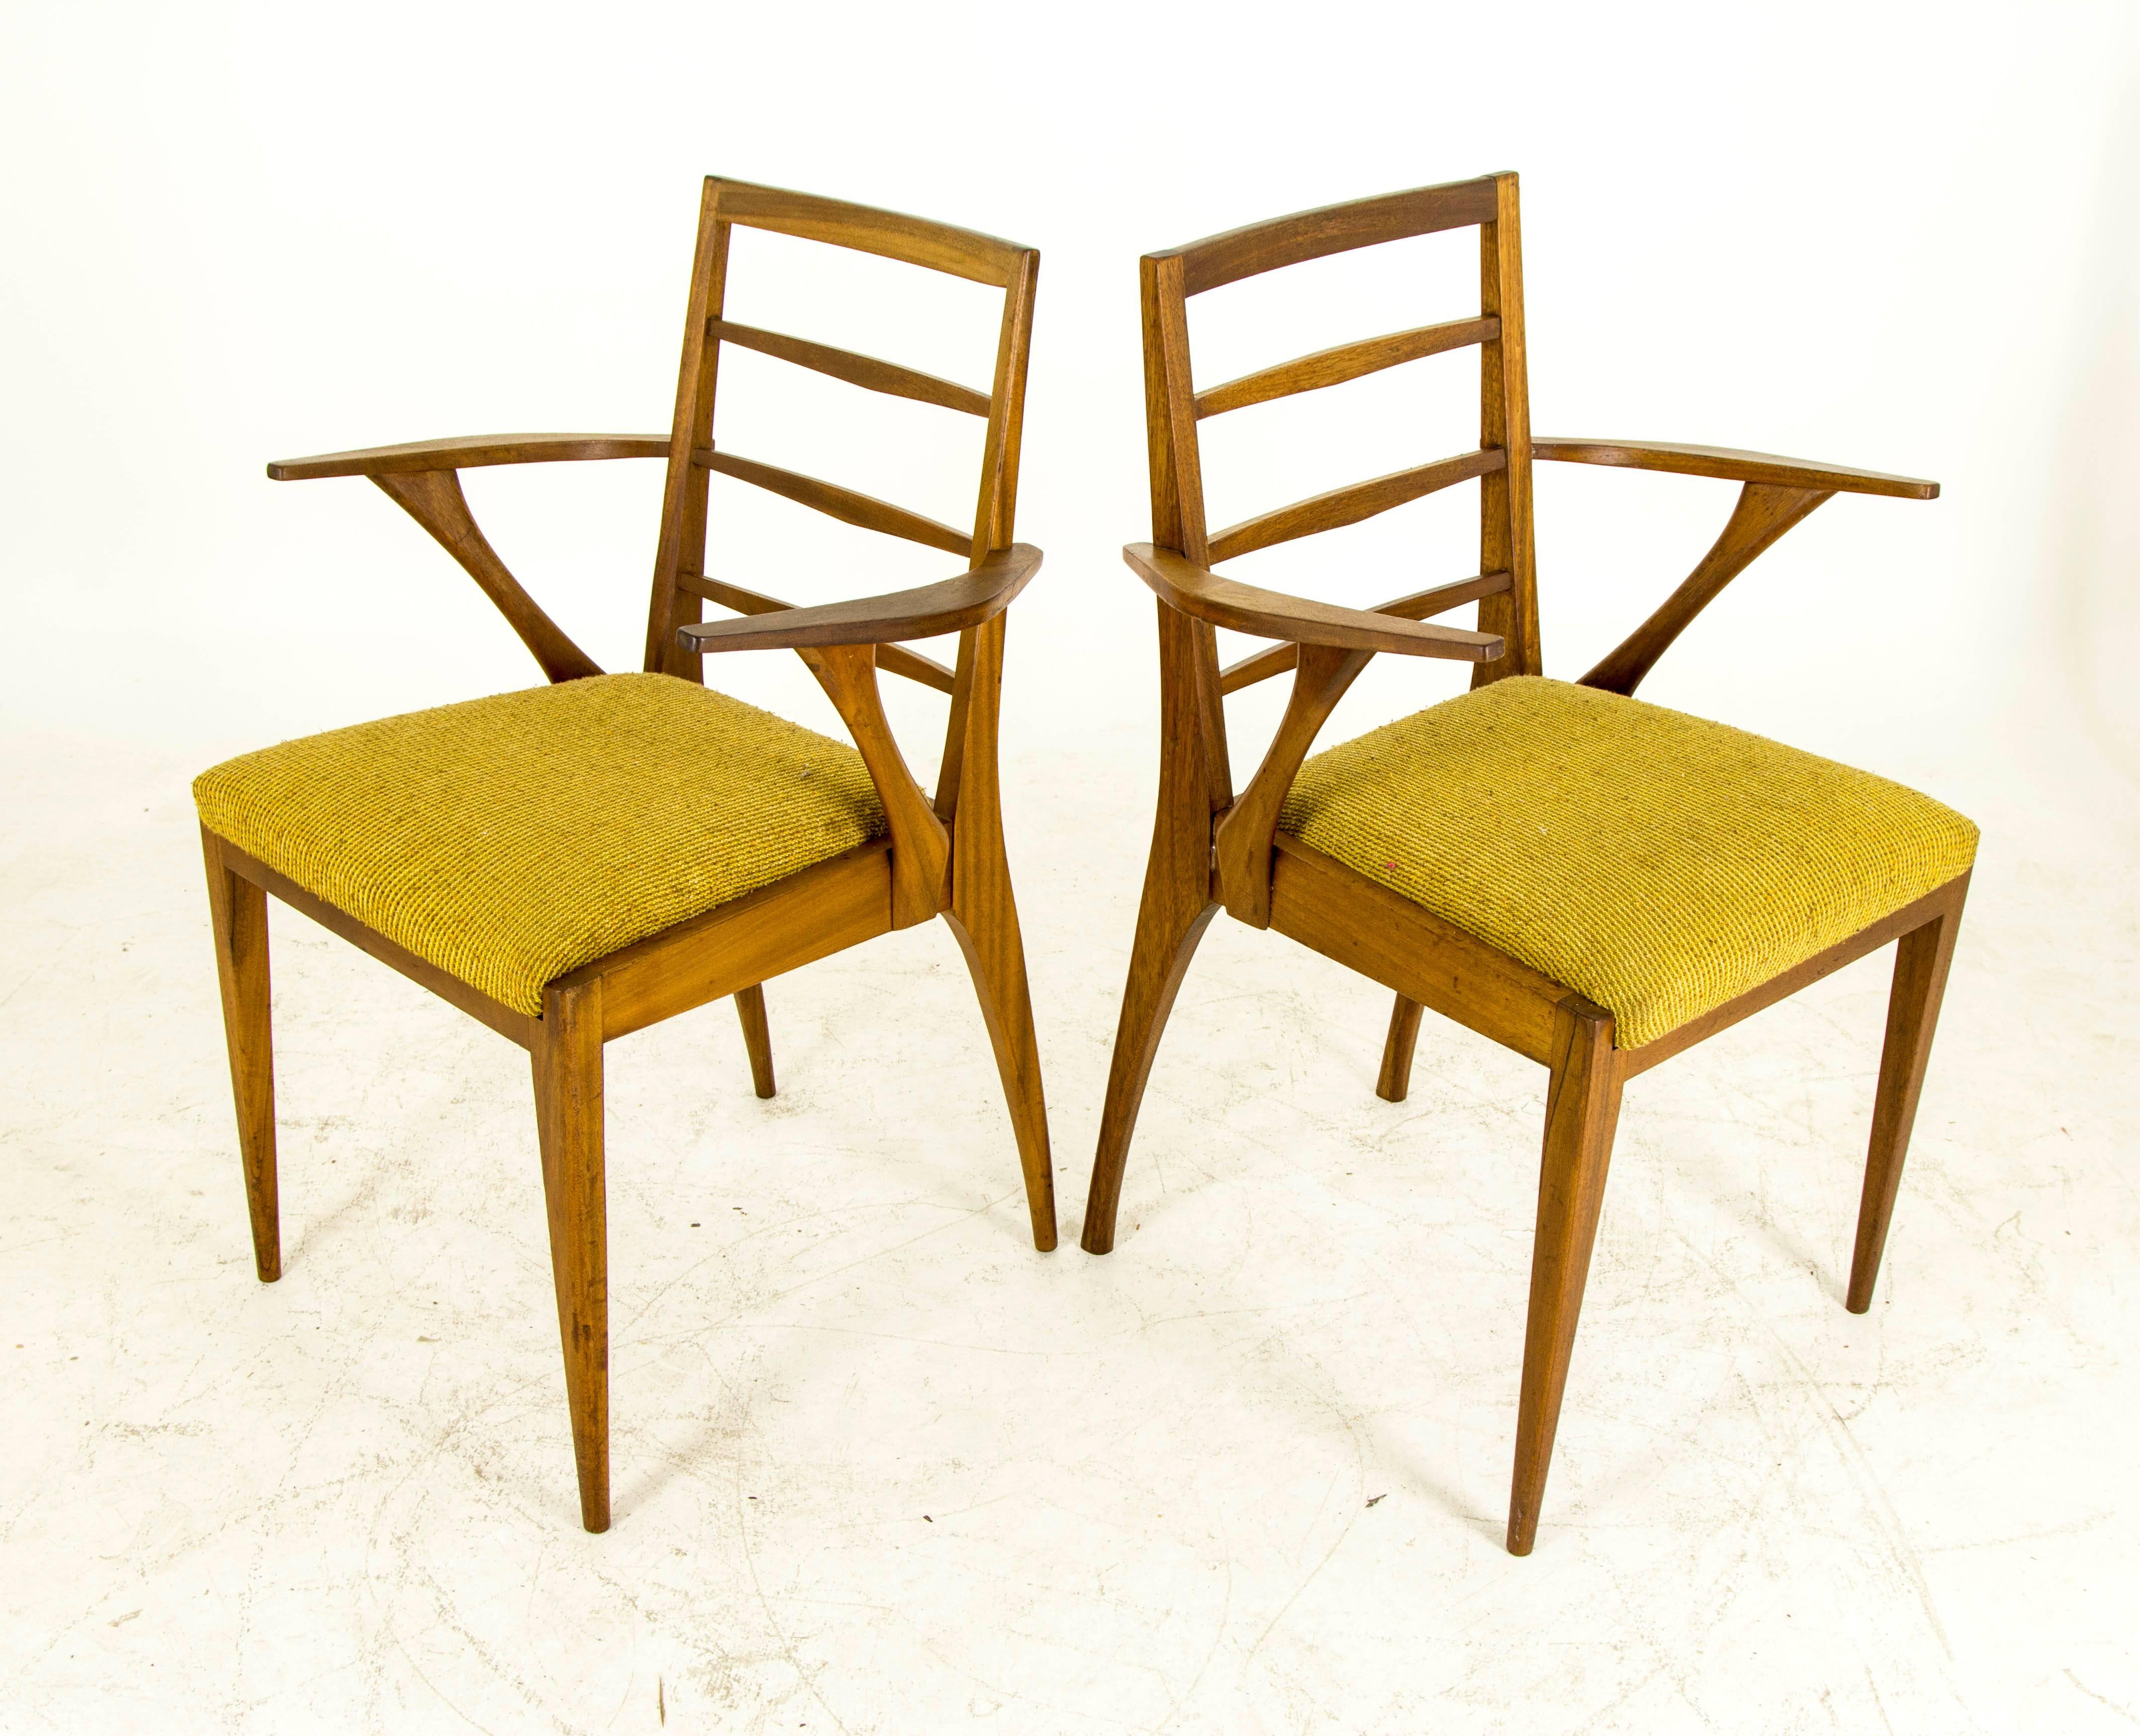 Hand-Crafted Vintage Mid-Century Modern Six Teak Dining Side Chairs by G Plan